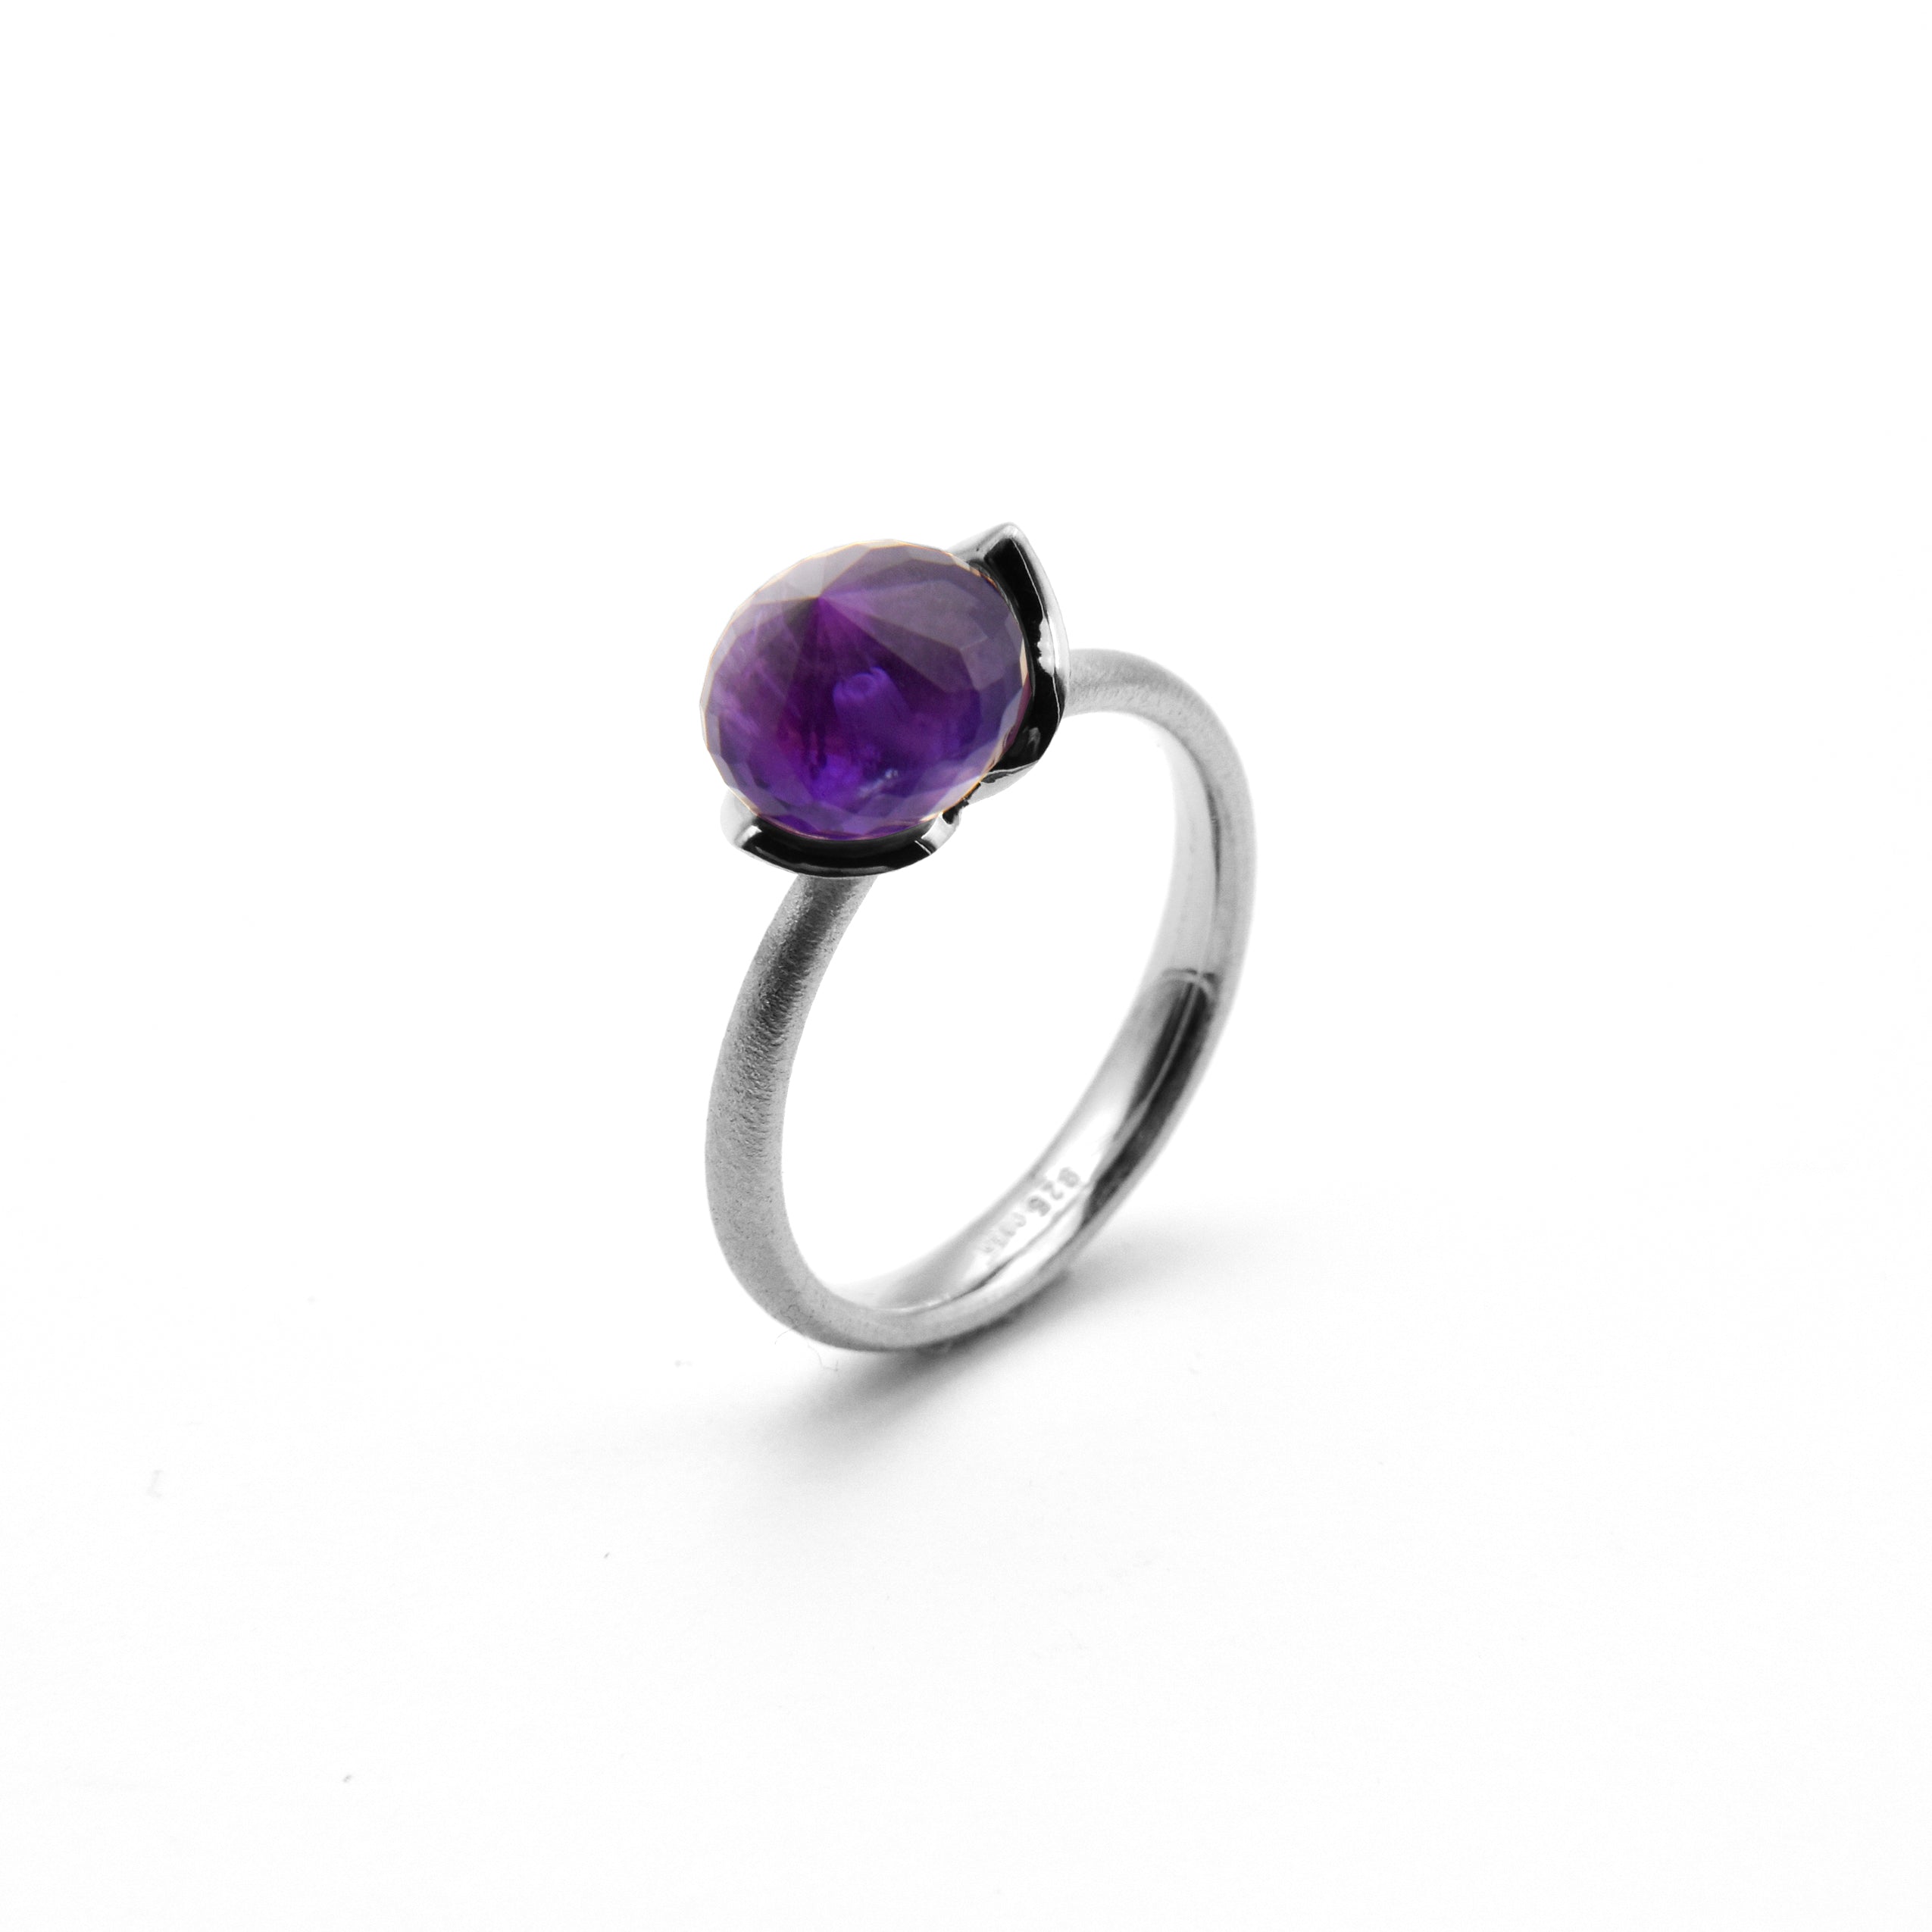 Dolce ring "smal" med ametyst 925/-